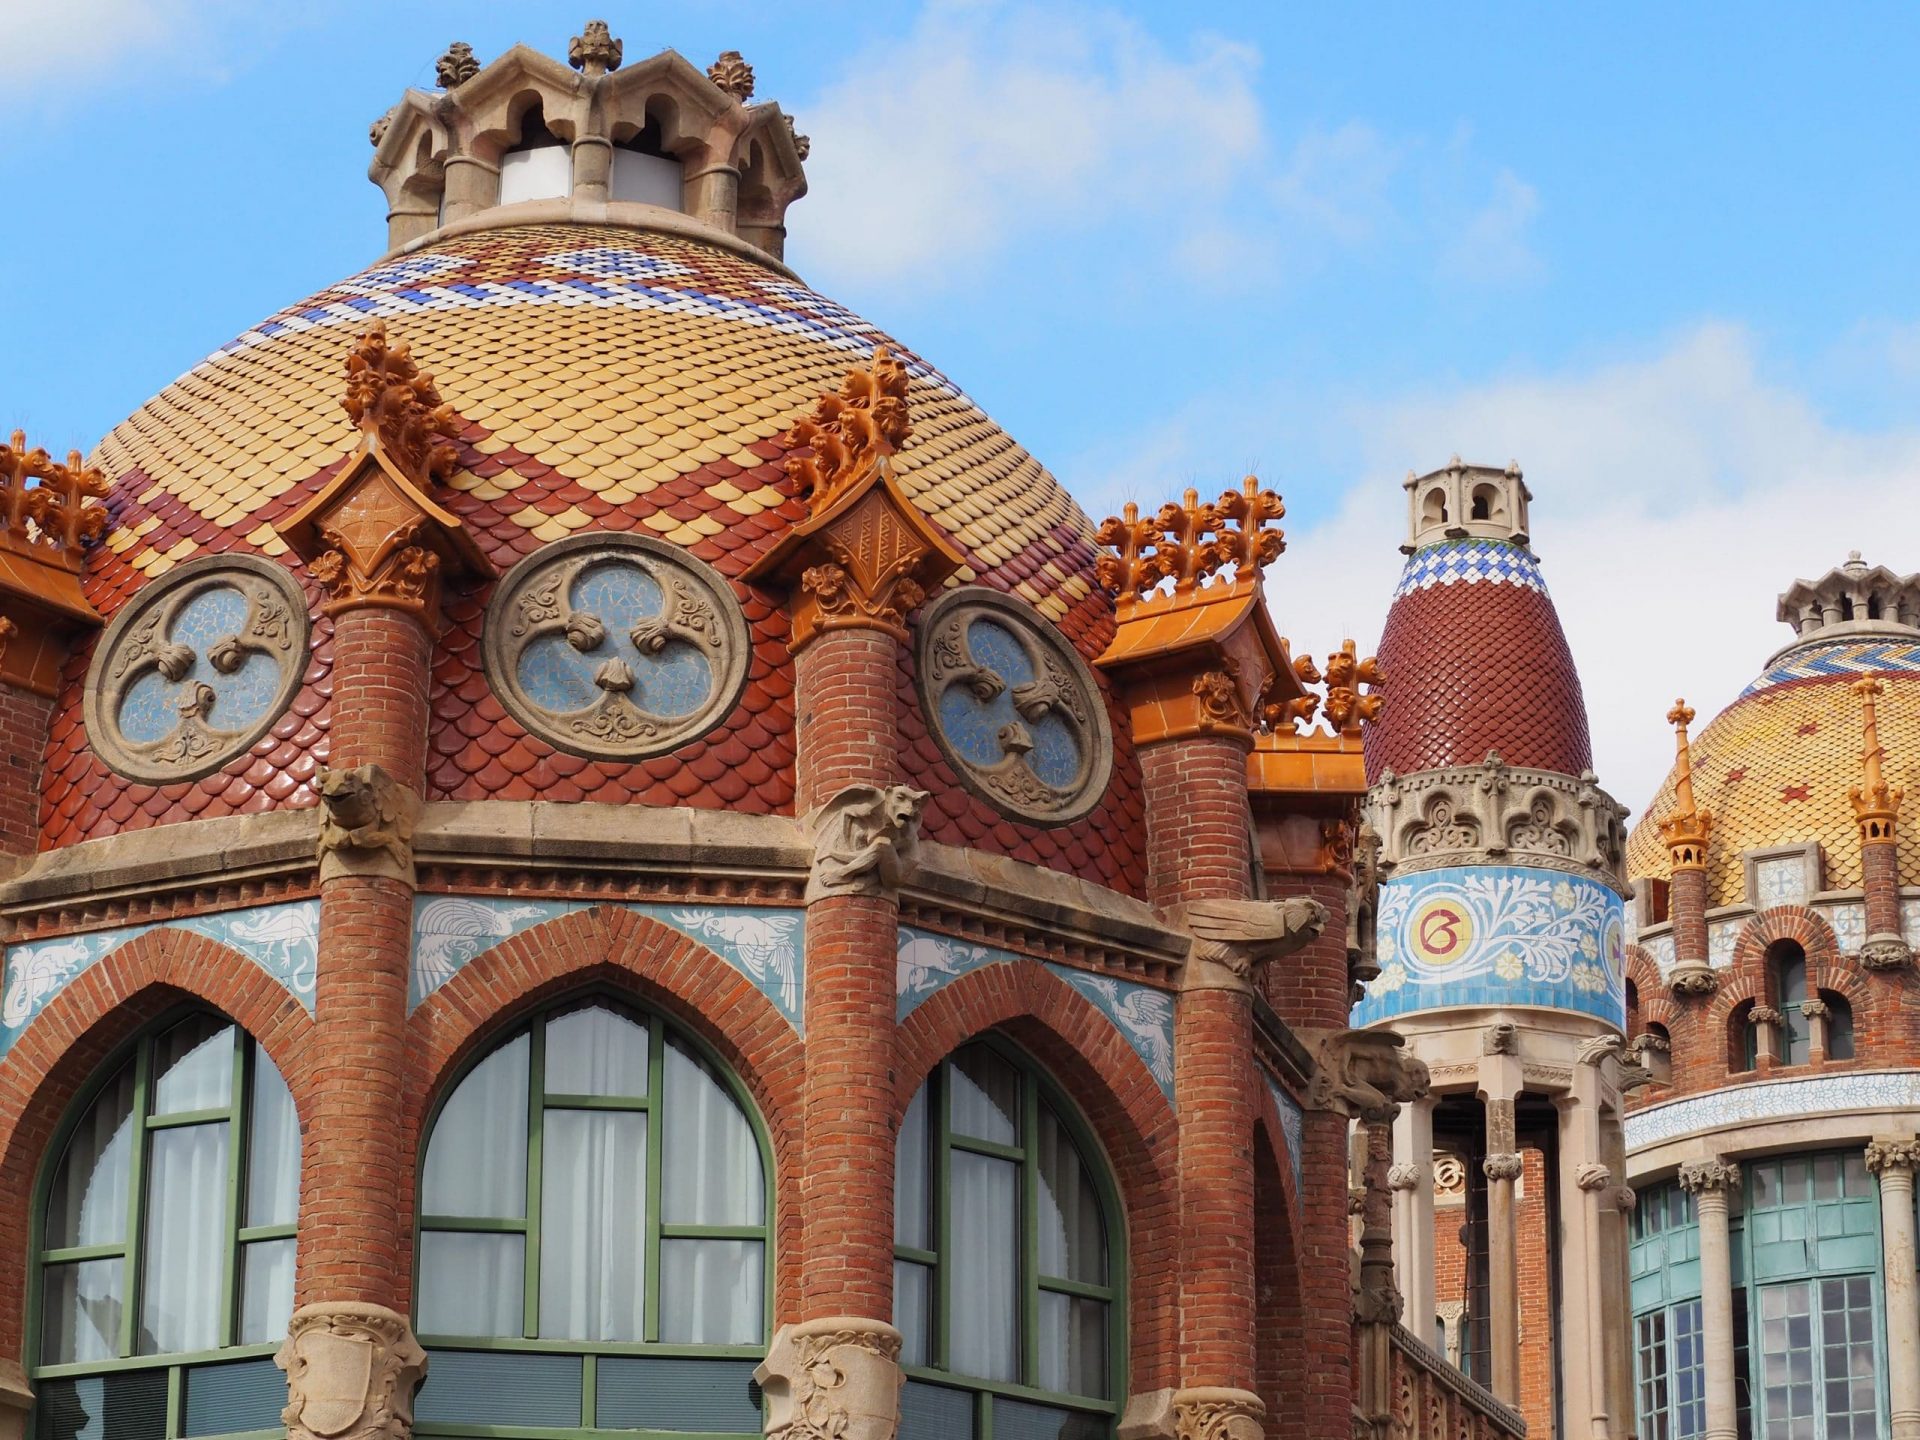 Beautiful modernist building in red brick and colored ceramics.